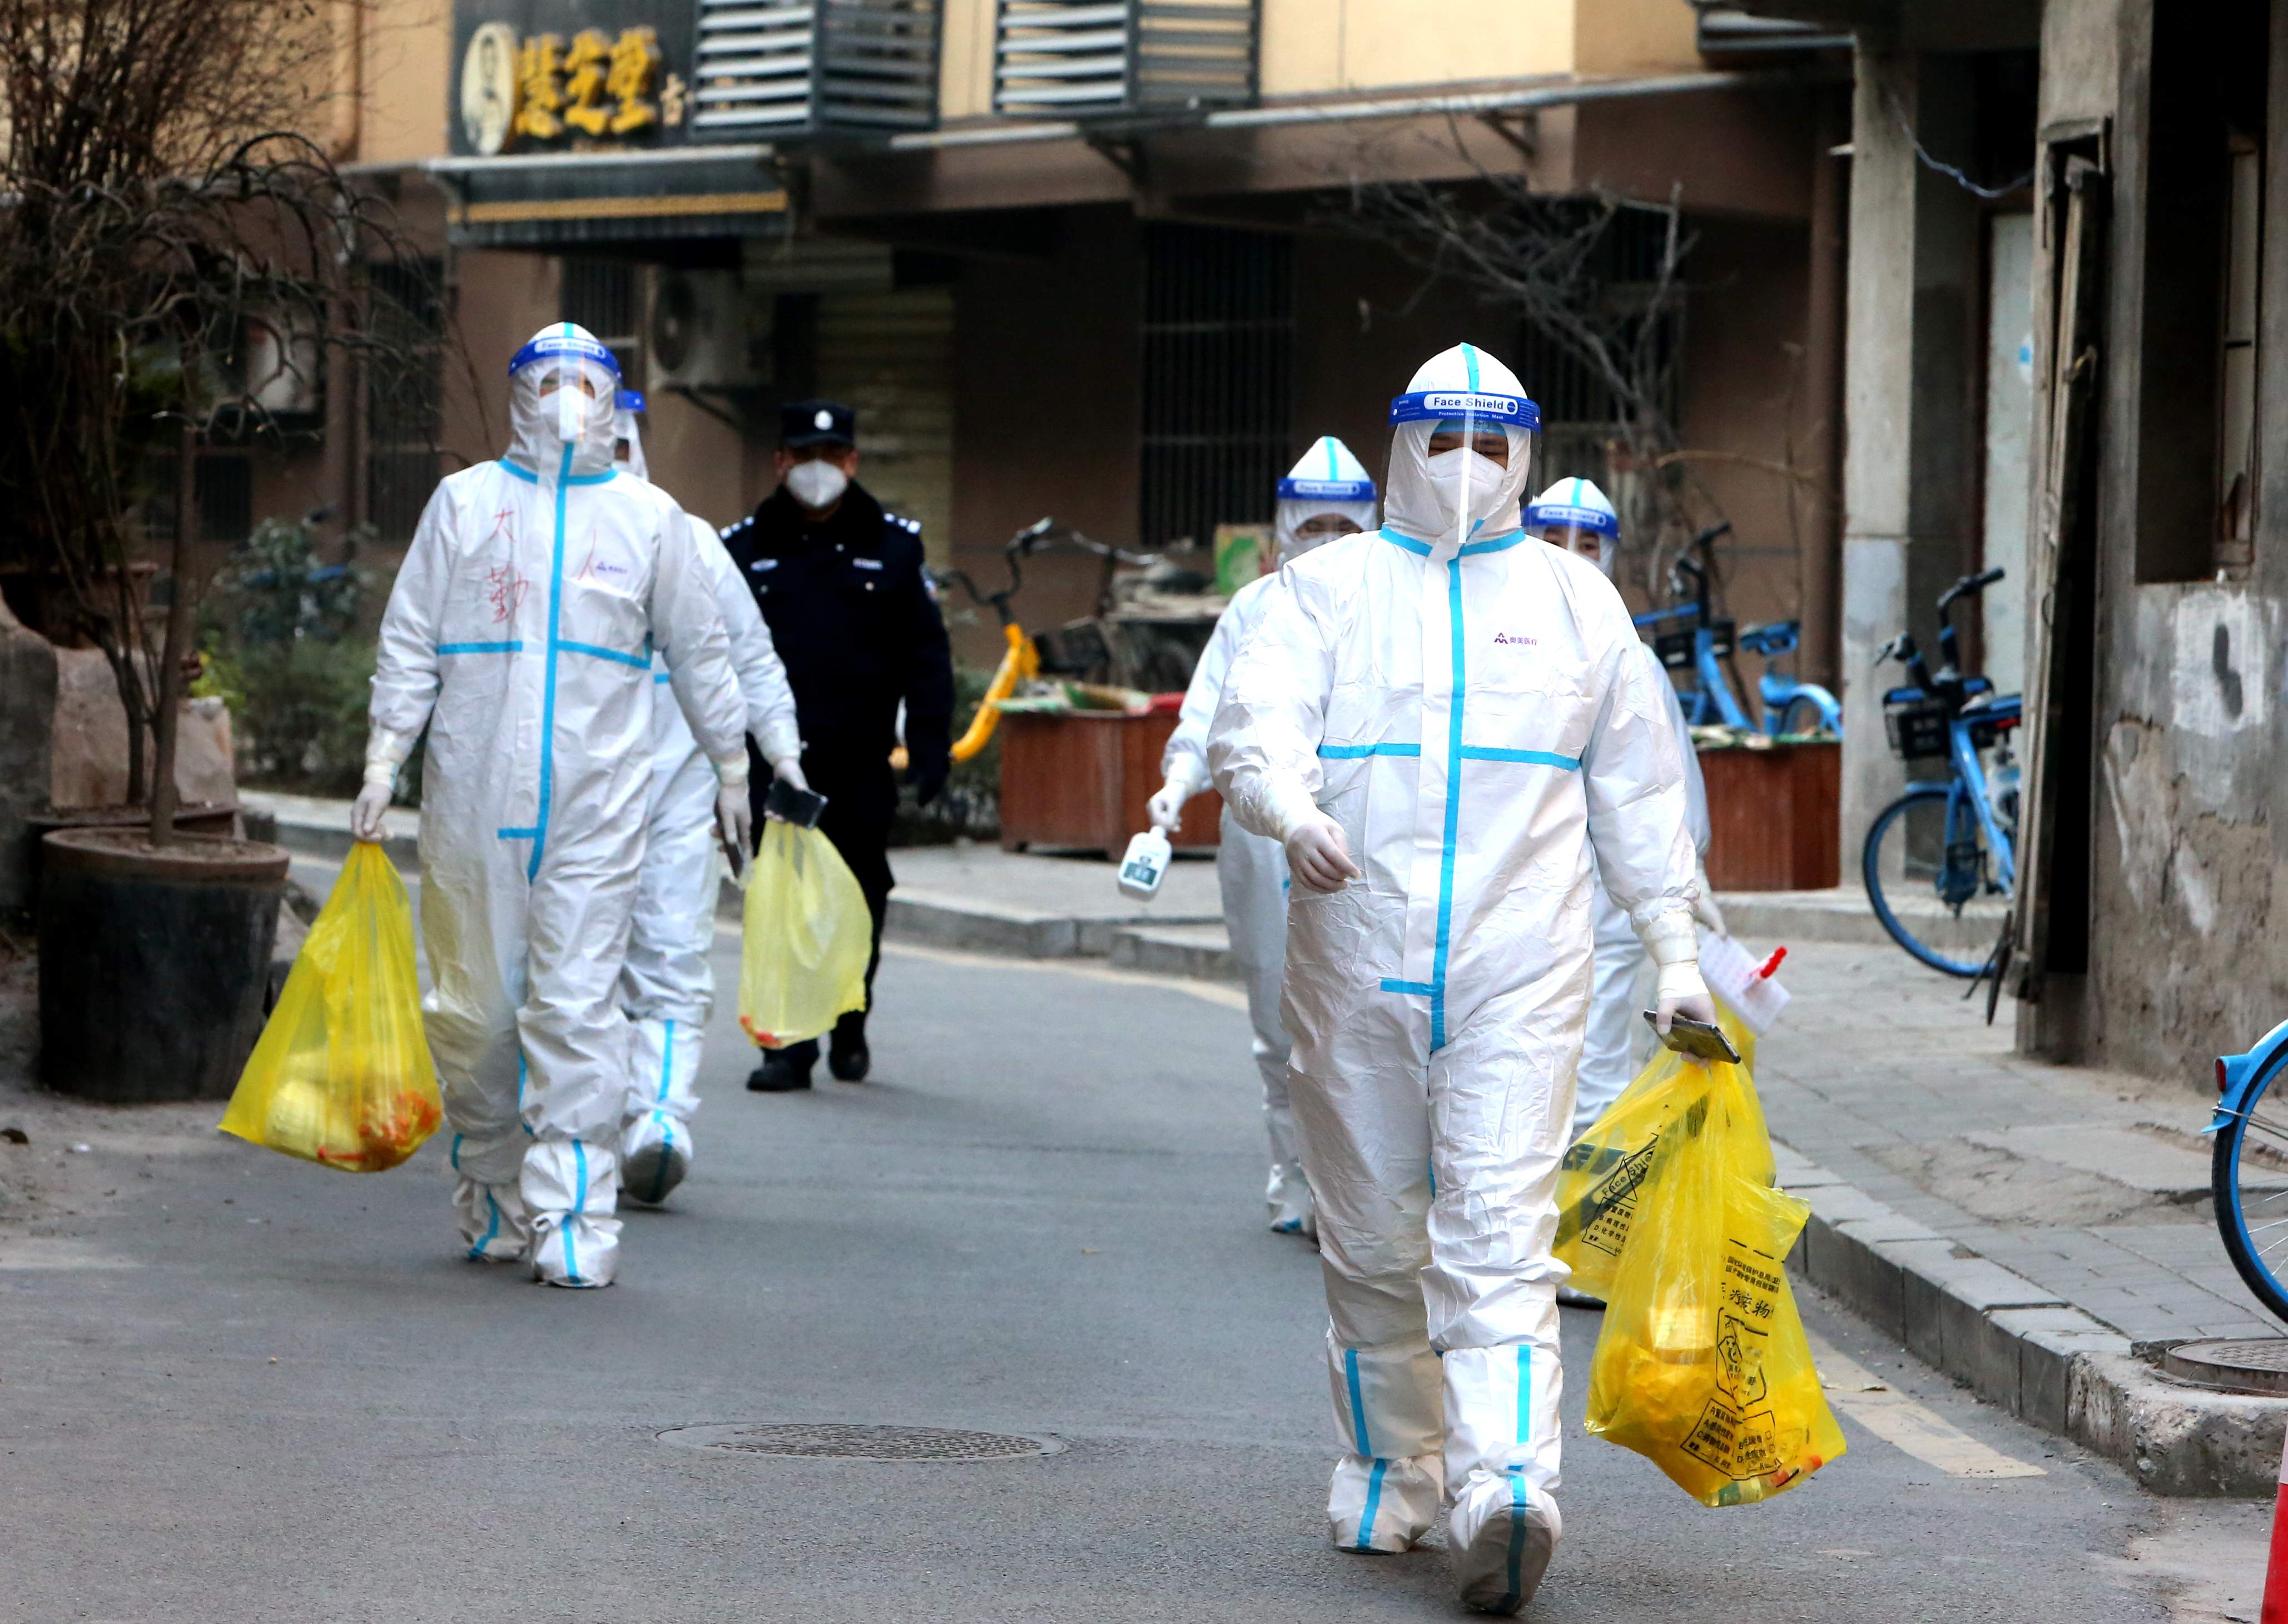 Staff members in protective suits conduct COVID-19 nuclei acid tests at a residential area on January 2, 2021 in Xi'an, Shaanxi Province of China. 